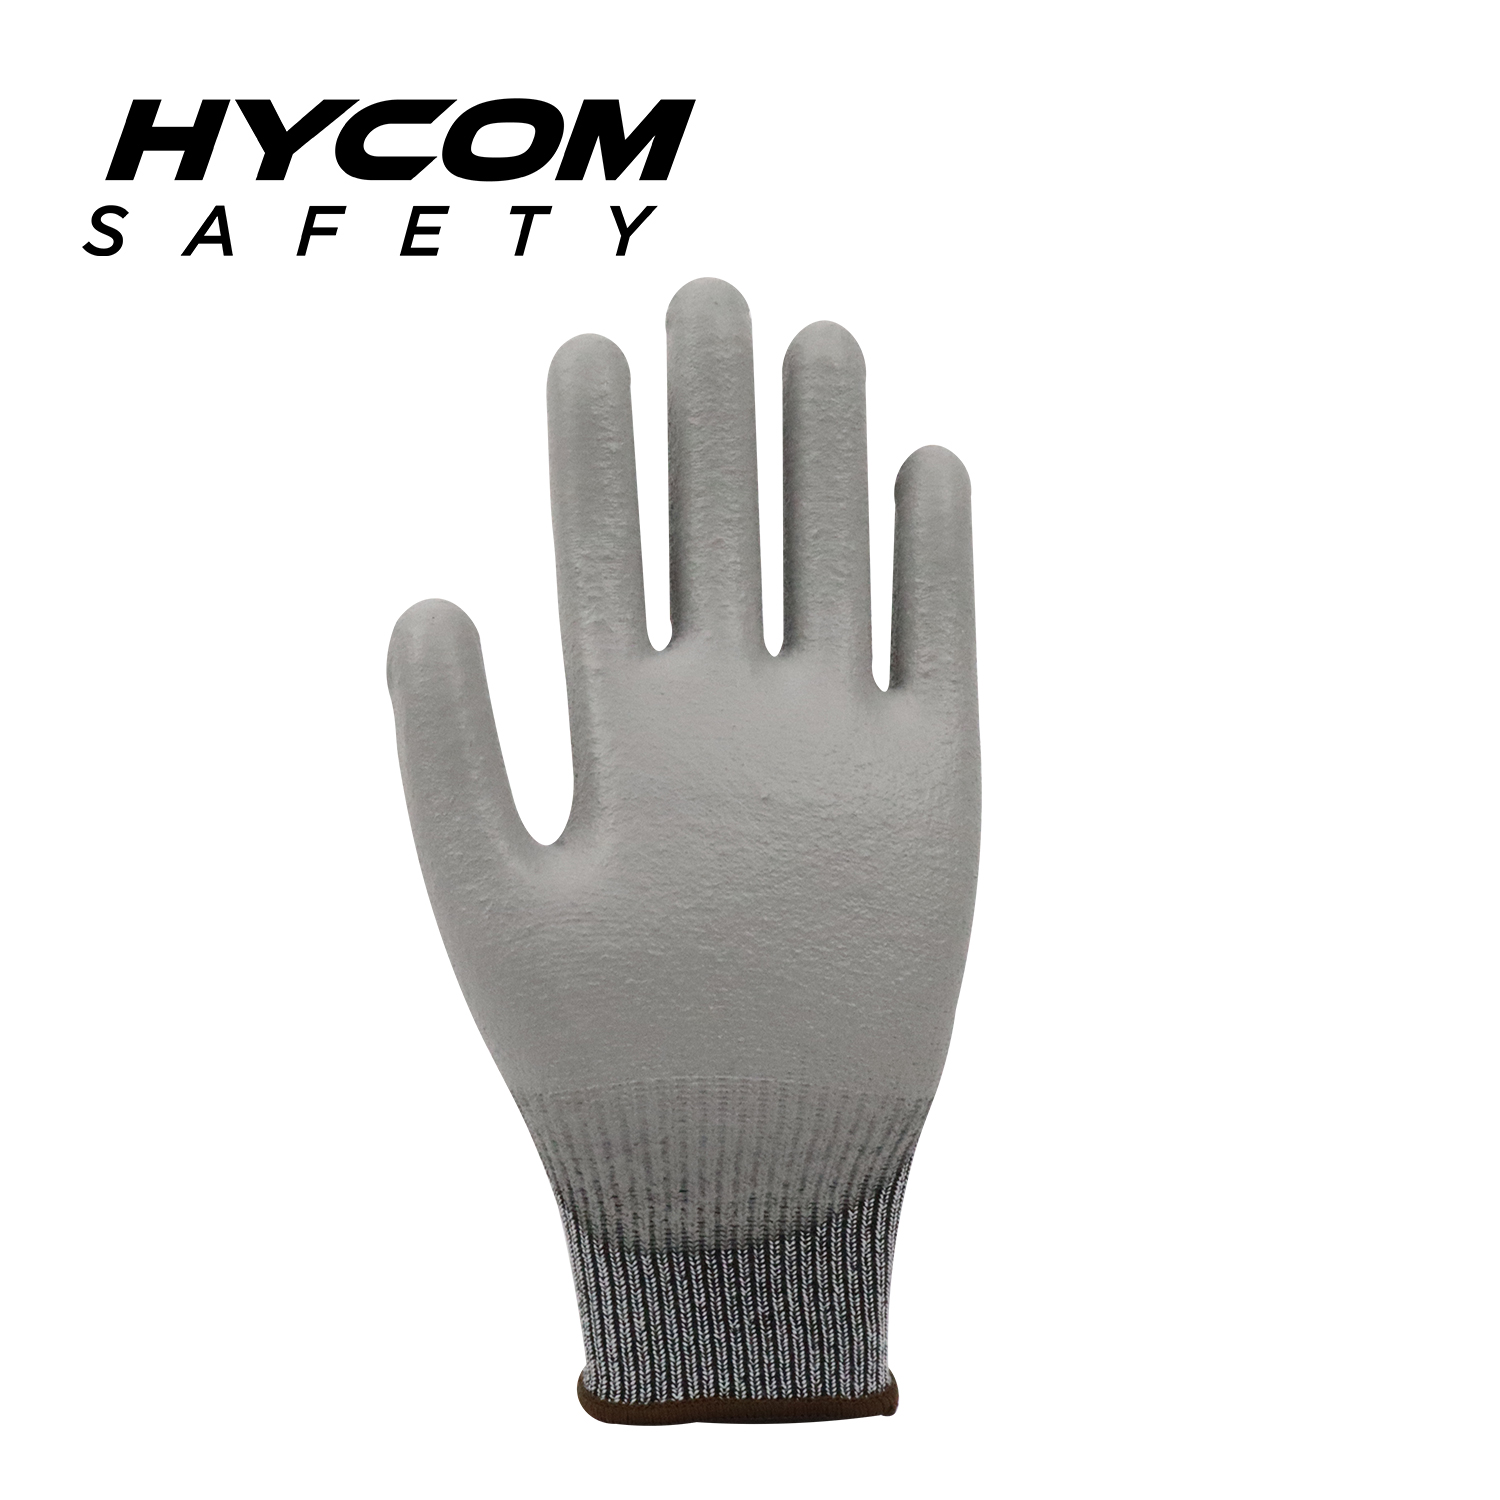 HYCOM Breath-cut13G ANSI 2 Cut Resistant Glove with Palm Polyurethane Coating Softer Hand Feeling PPE Work Gloves